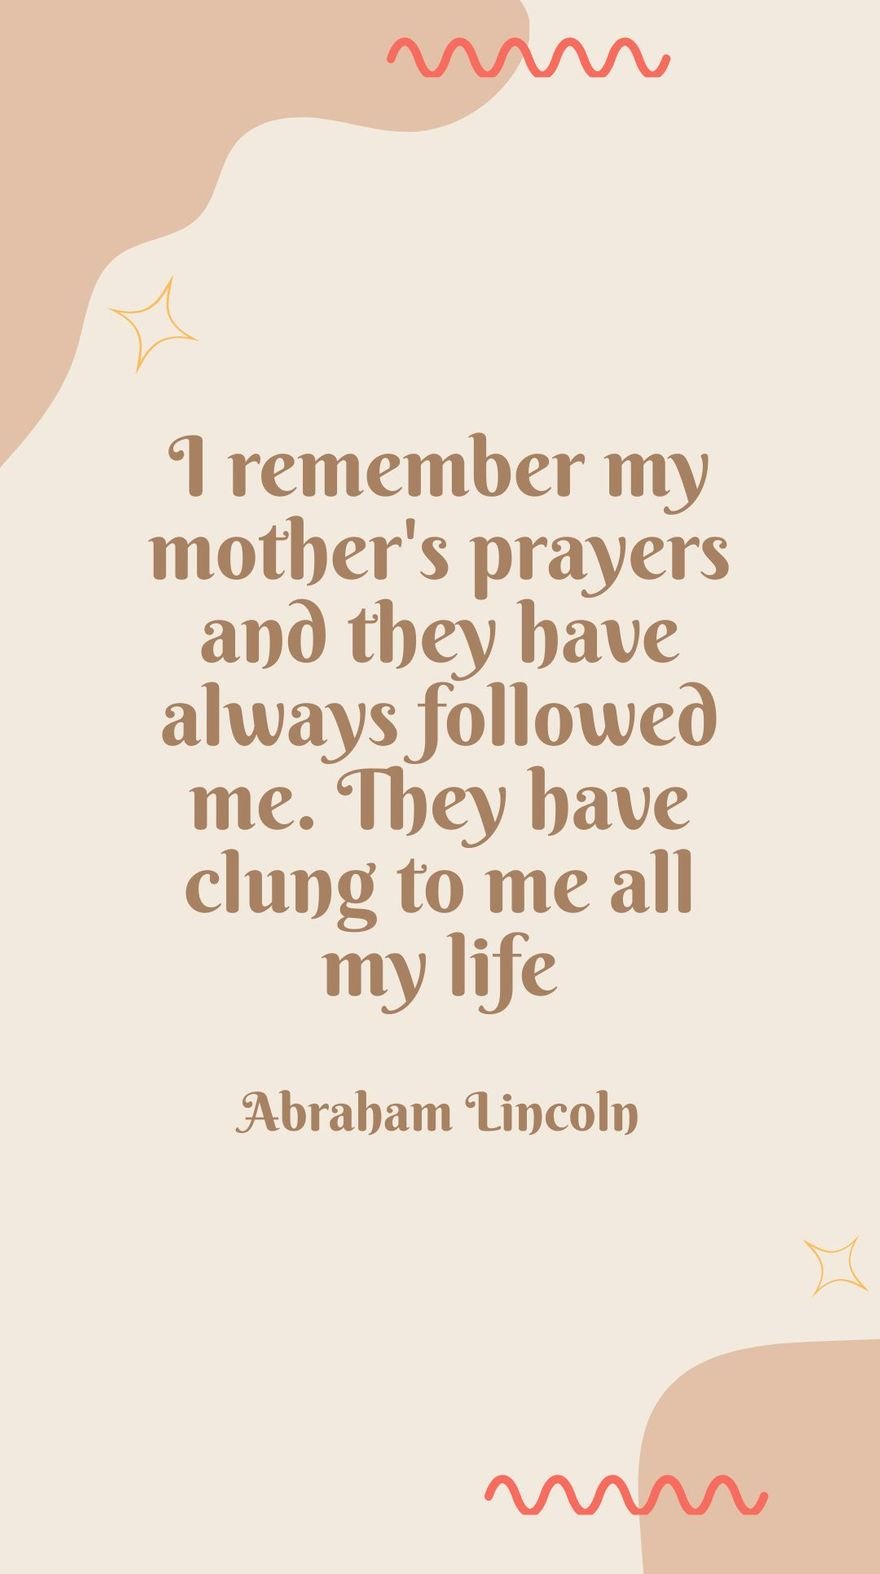 Free Abraham Lincoln - I remember my mother's prayers and they have always followed me. They have clung to me all my life. 